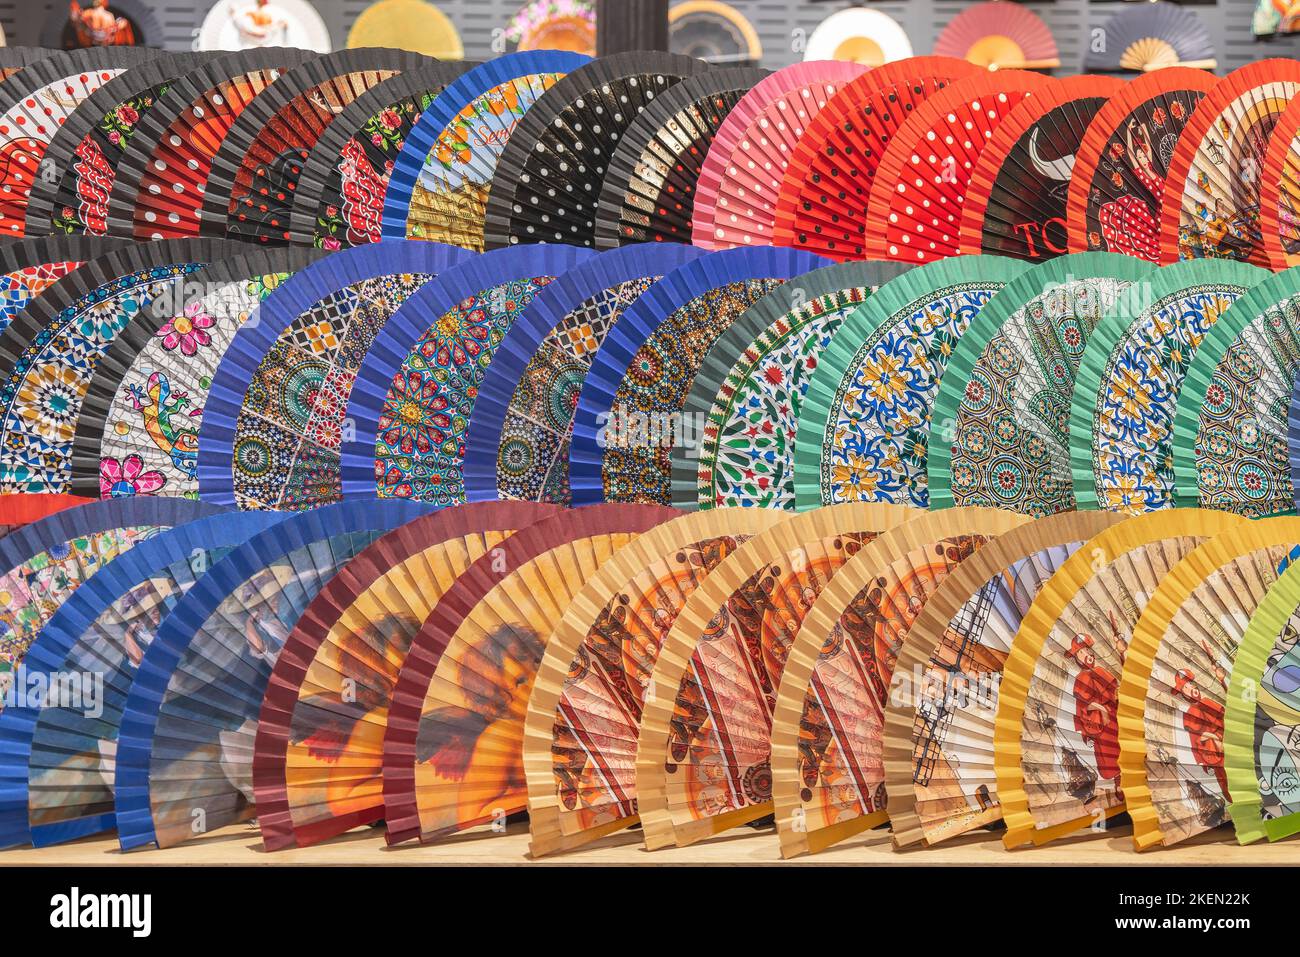 Exhibition of decorated hand fans for decoration and tourism souvenir Stock Photo